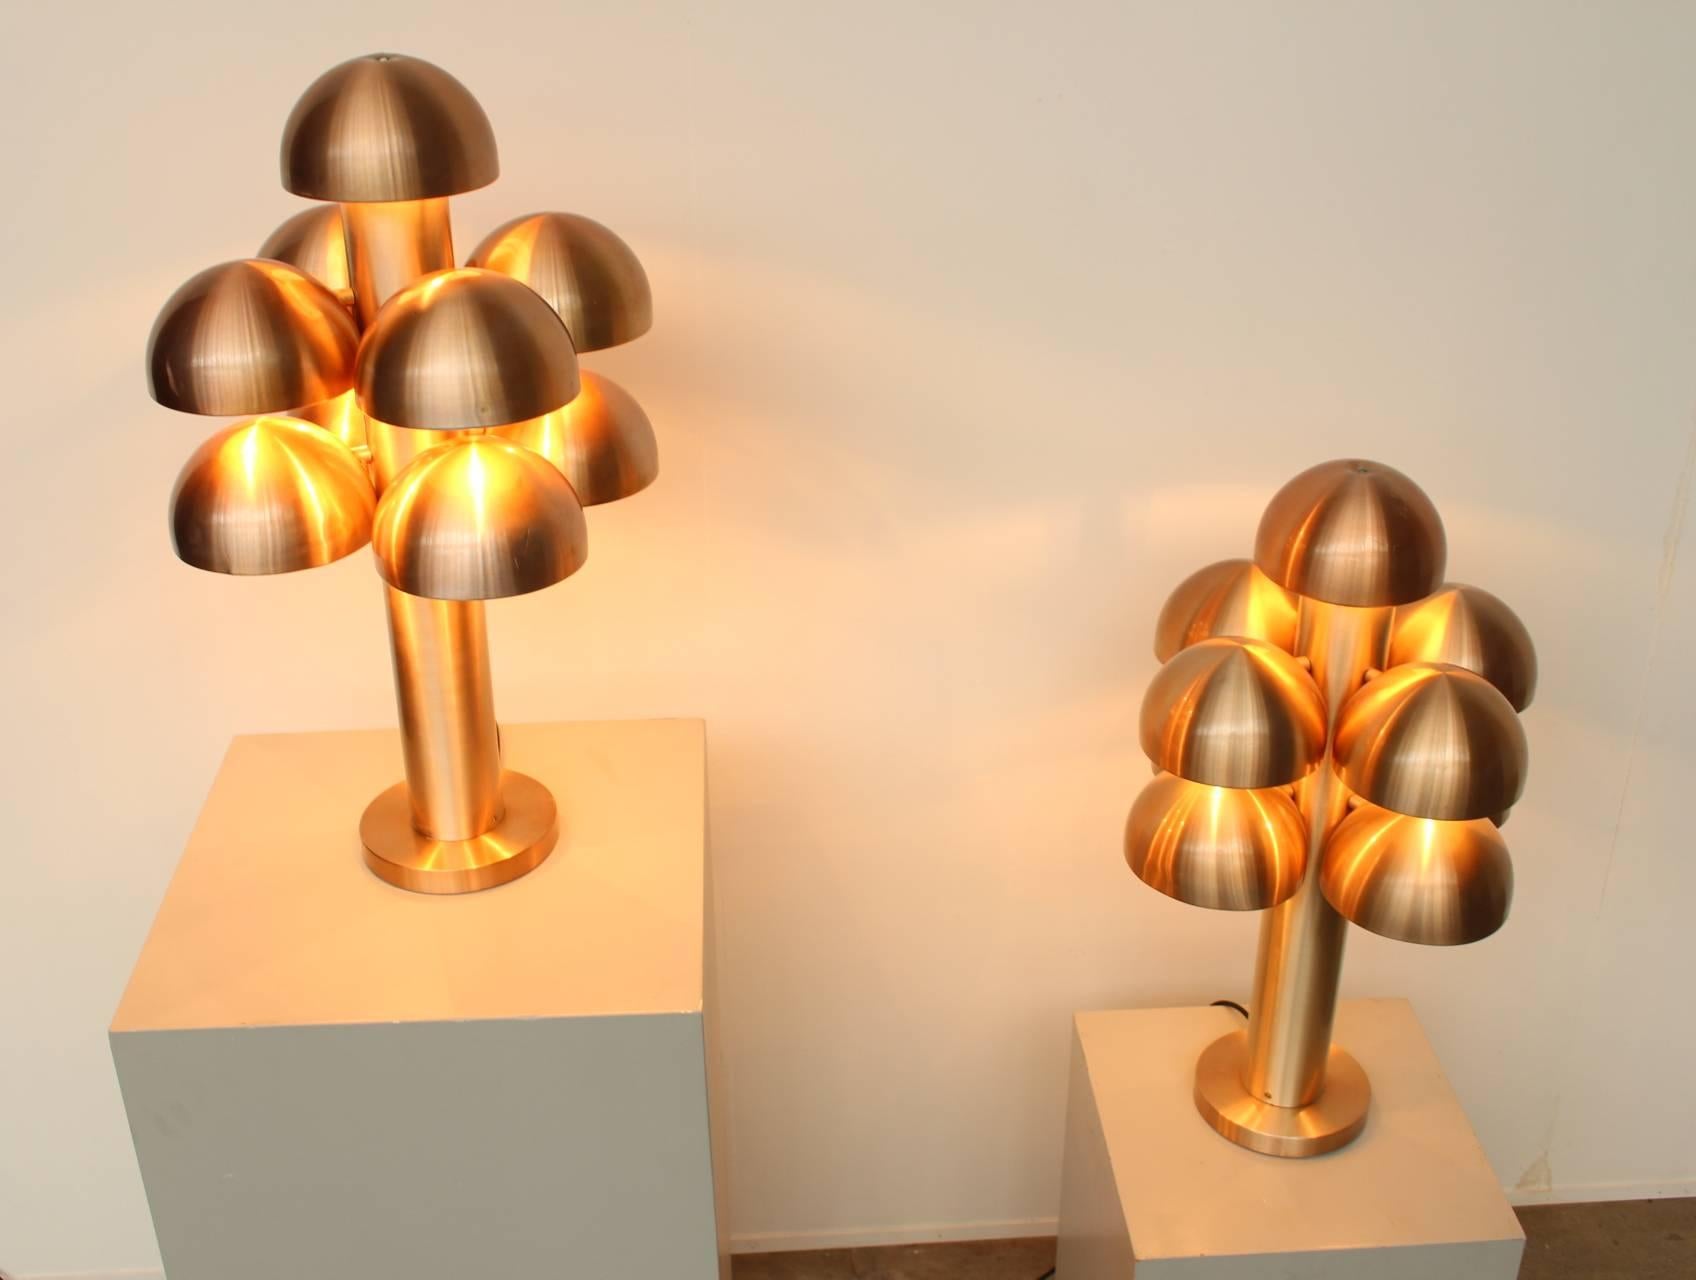 Very impressive set of mushroom shaped table lamps called Cantharelle by Finnish designer Maija Liisa Komulainen for the Dutch firm Raak Amsterdam in 1972. Both lamps are identical, in very good condition and all 9 light sources on each lamp